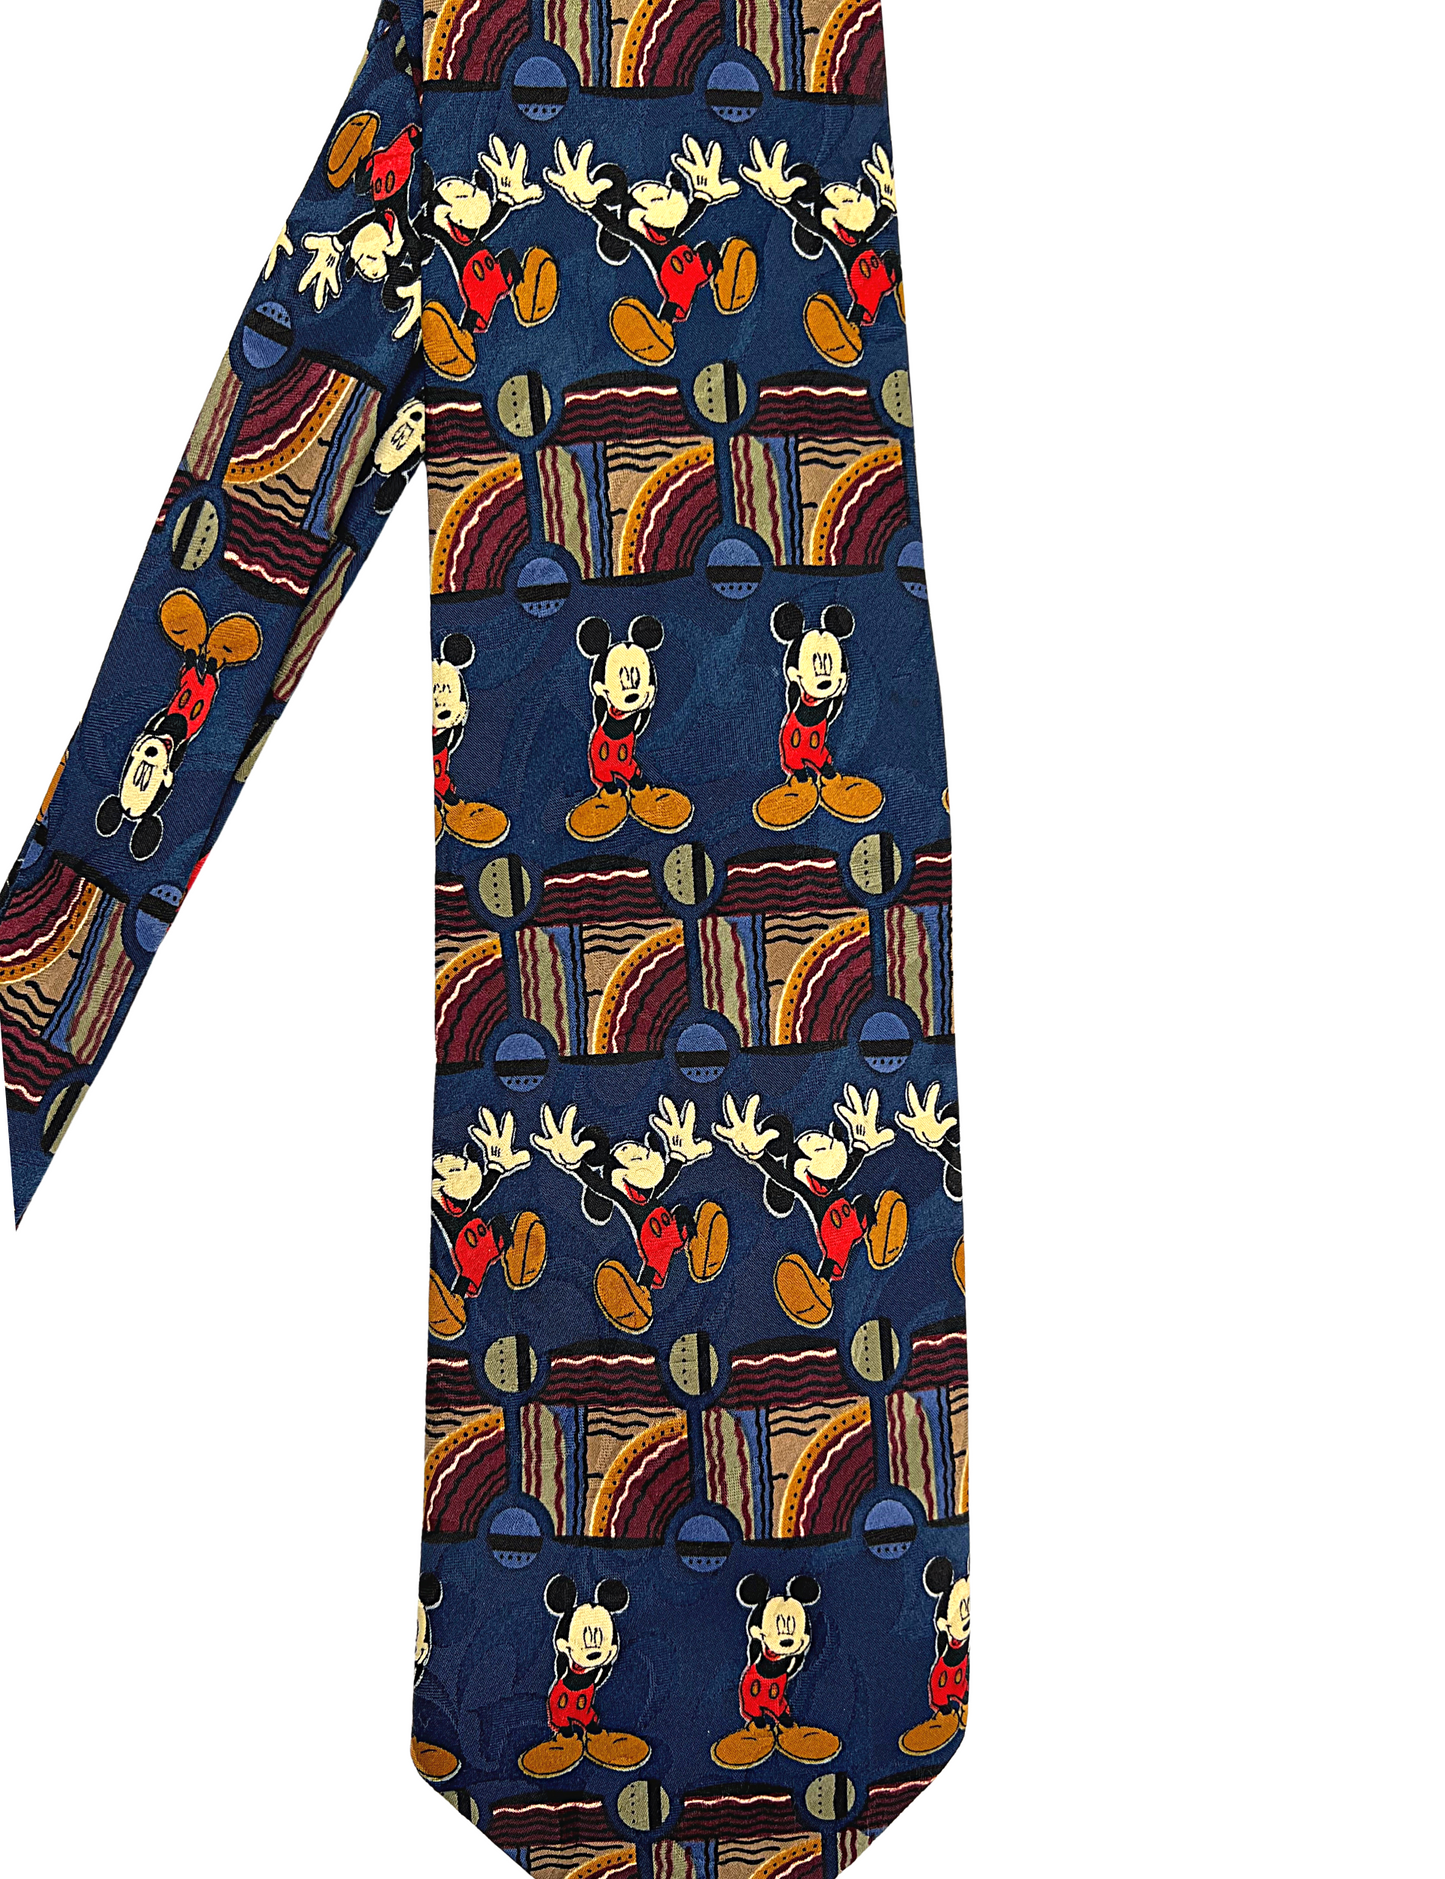 90’s Disney Mickey Mouse Mickey Unlimited Abstract Necktie